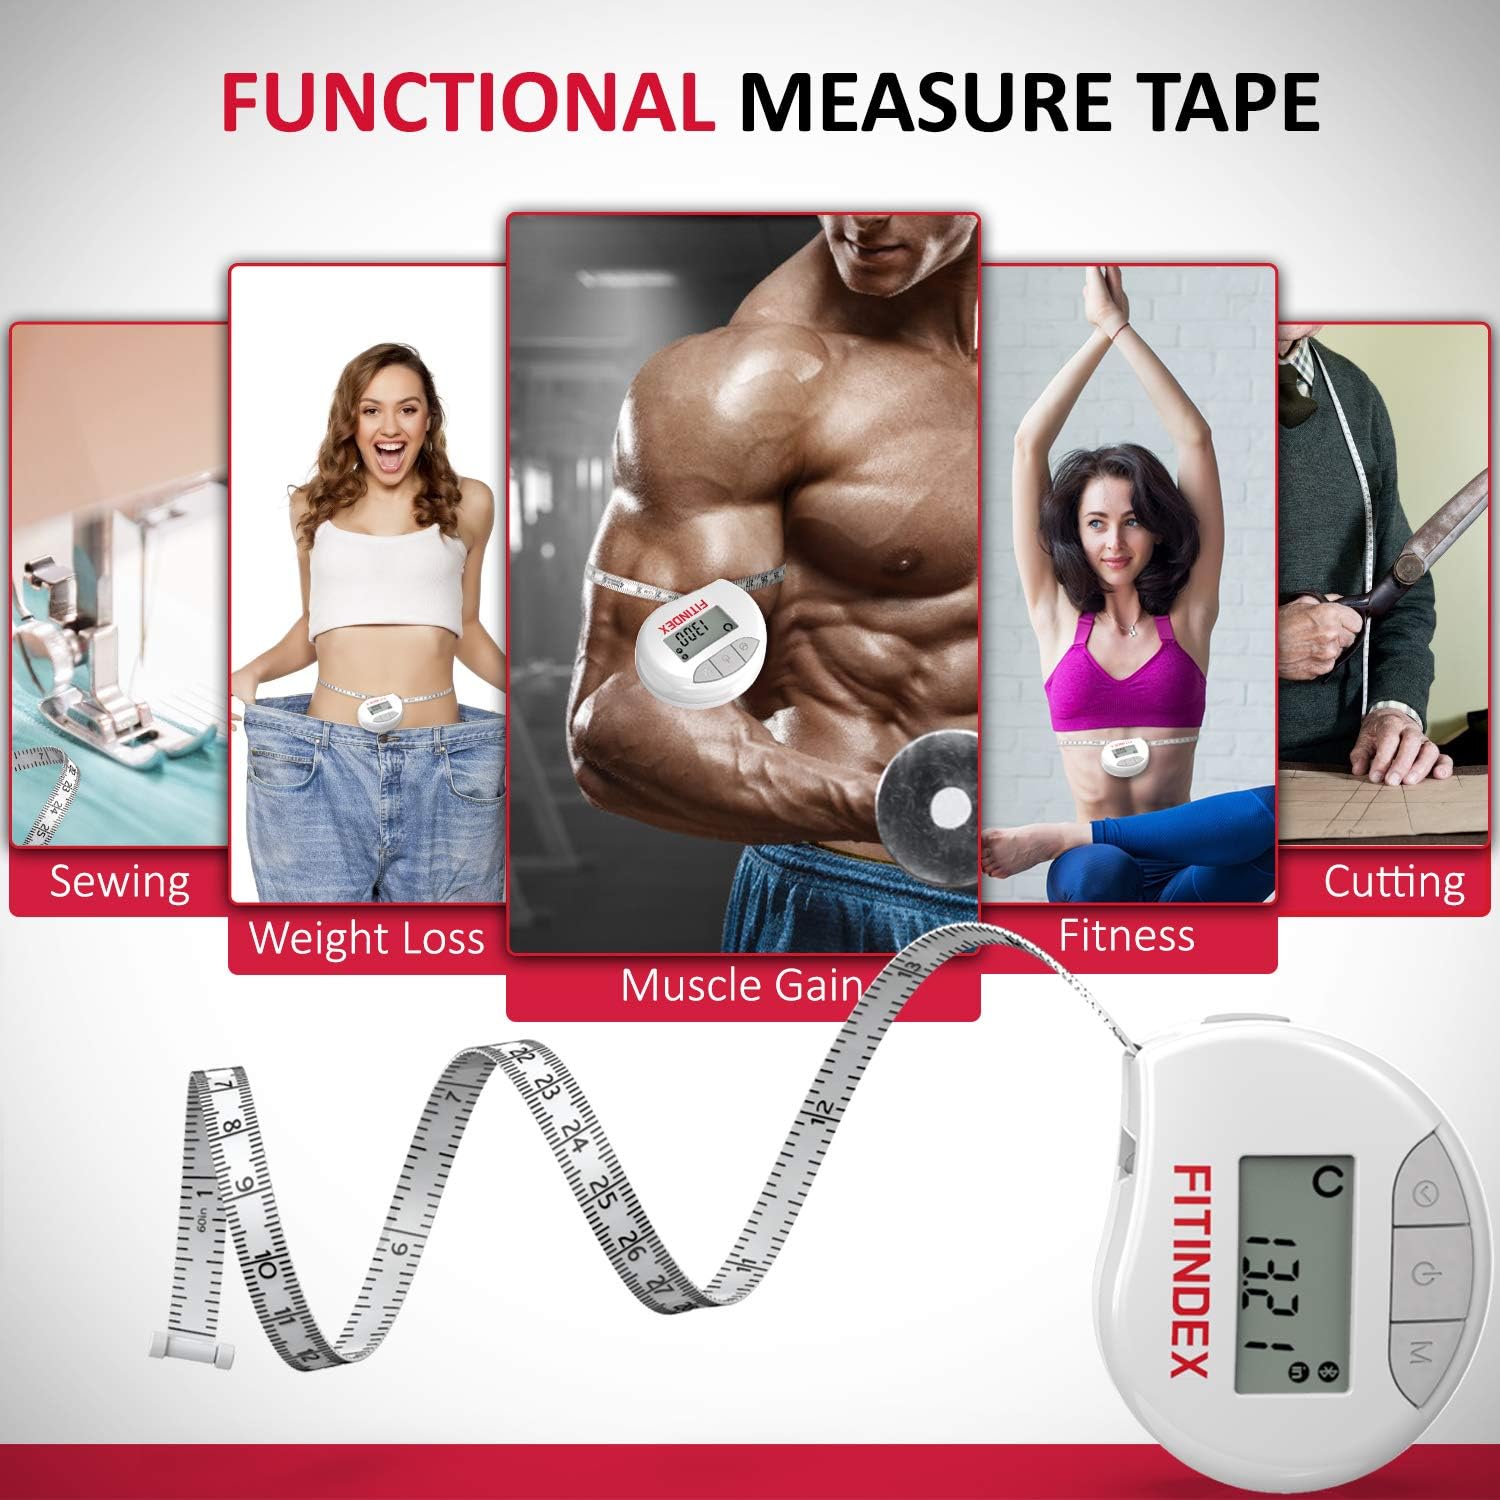 How to Take Tape Measurements – AFFINITY FITNESS